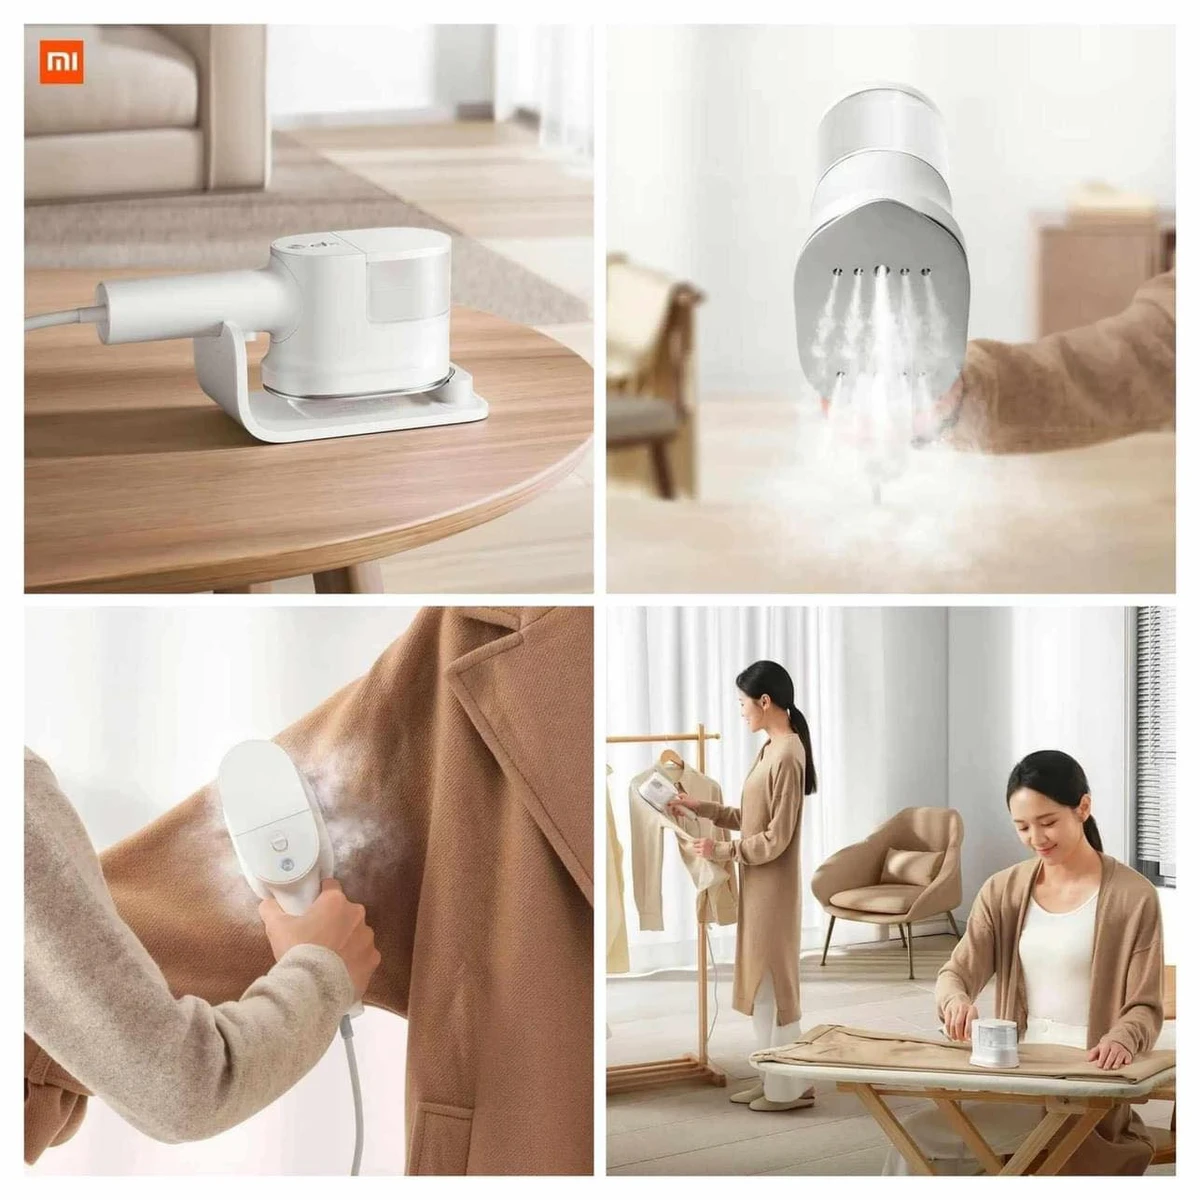 XIAOMI Mijia Handheld Steam Iron Mite Removal for Clothes Portable Travel Garment Steamer